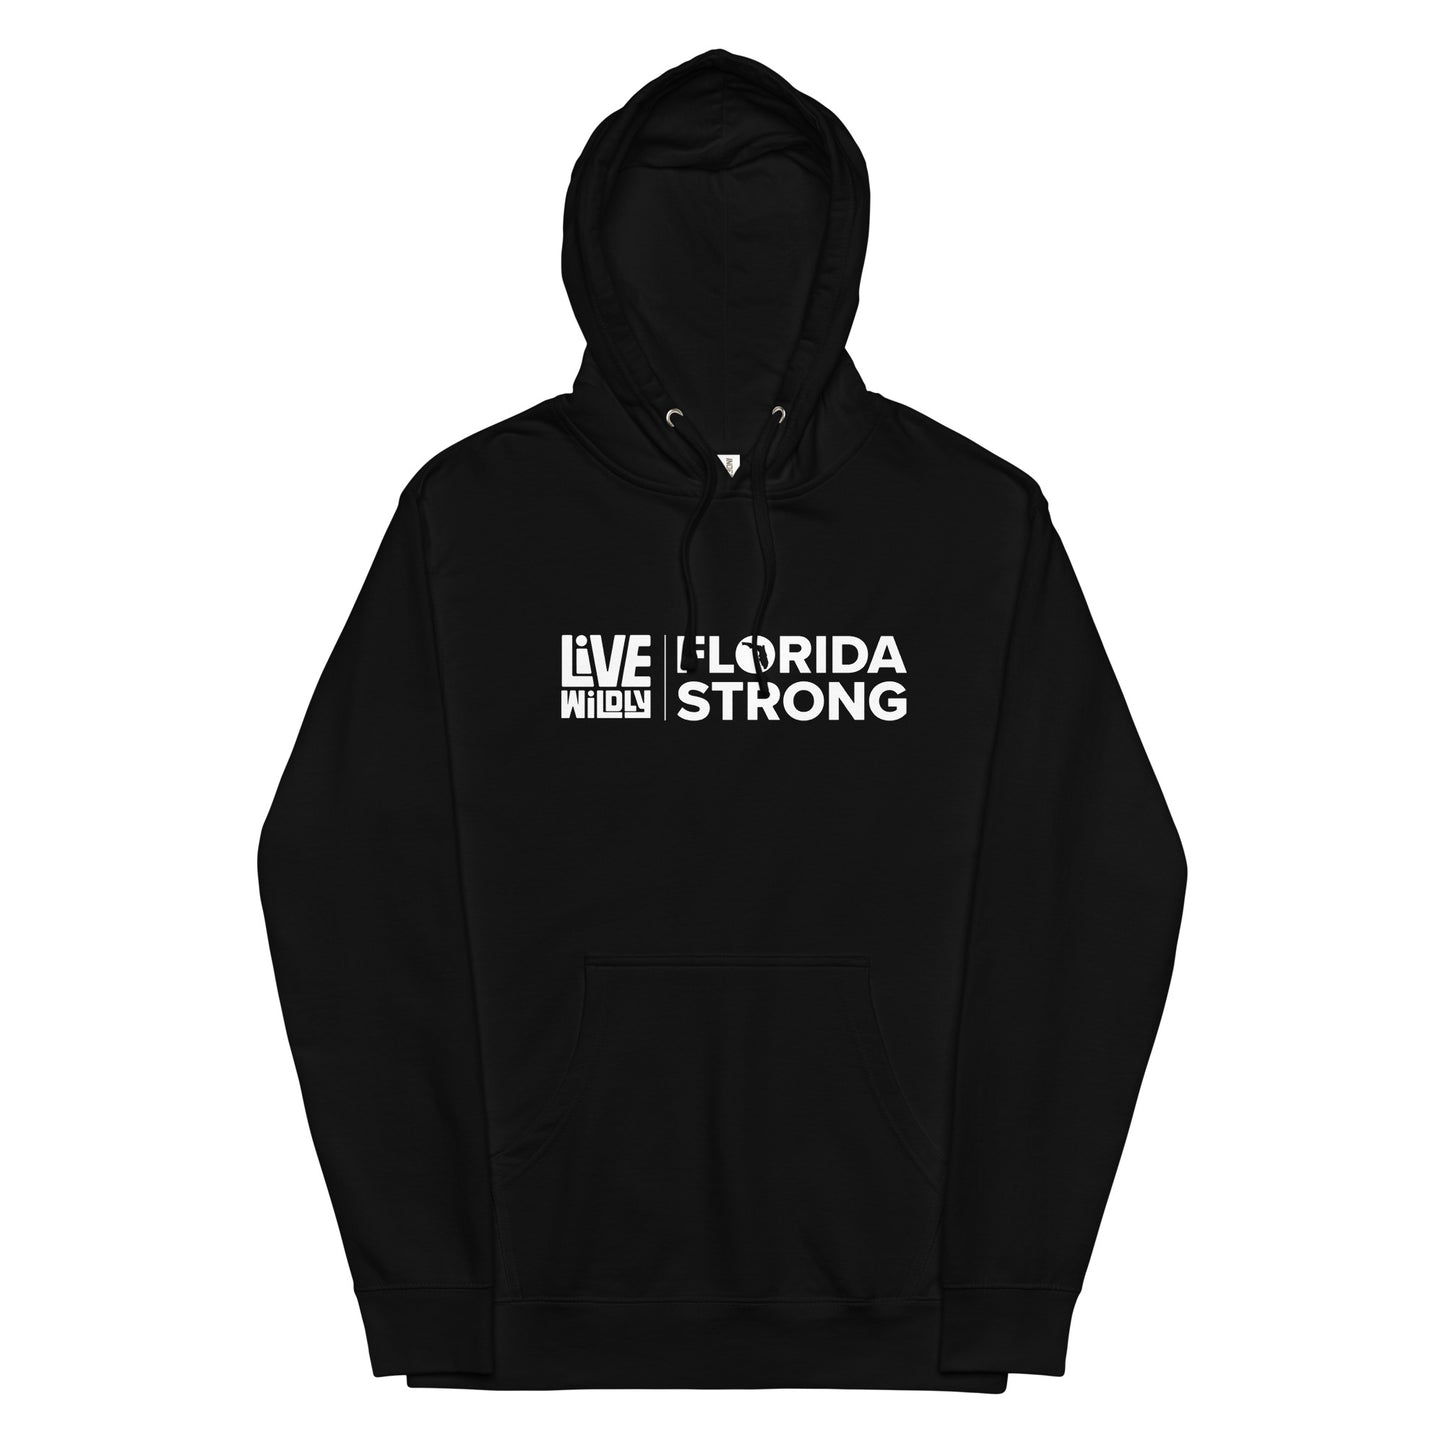 Florida Strong - Unisex Midweight Hoodie - Black Front - Live Wildly 